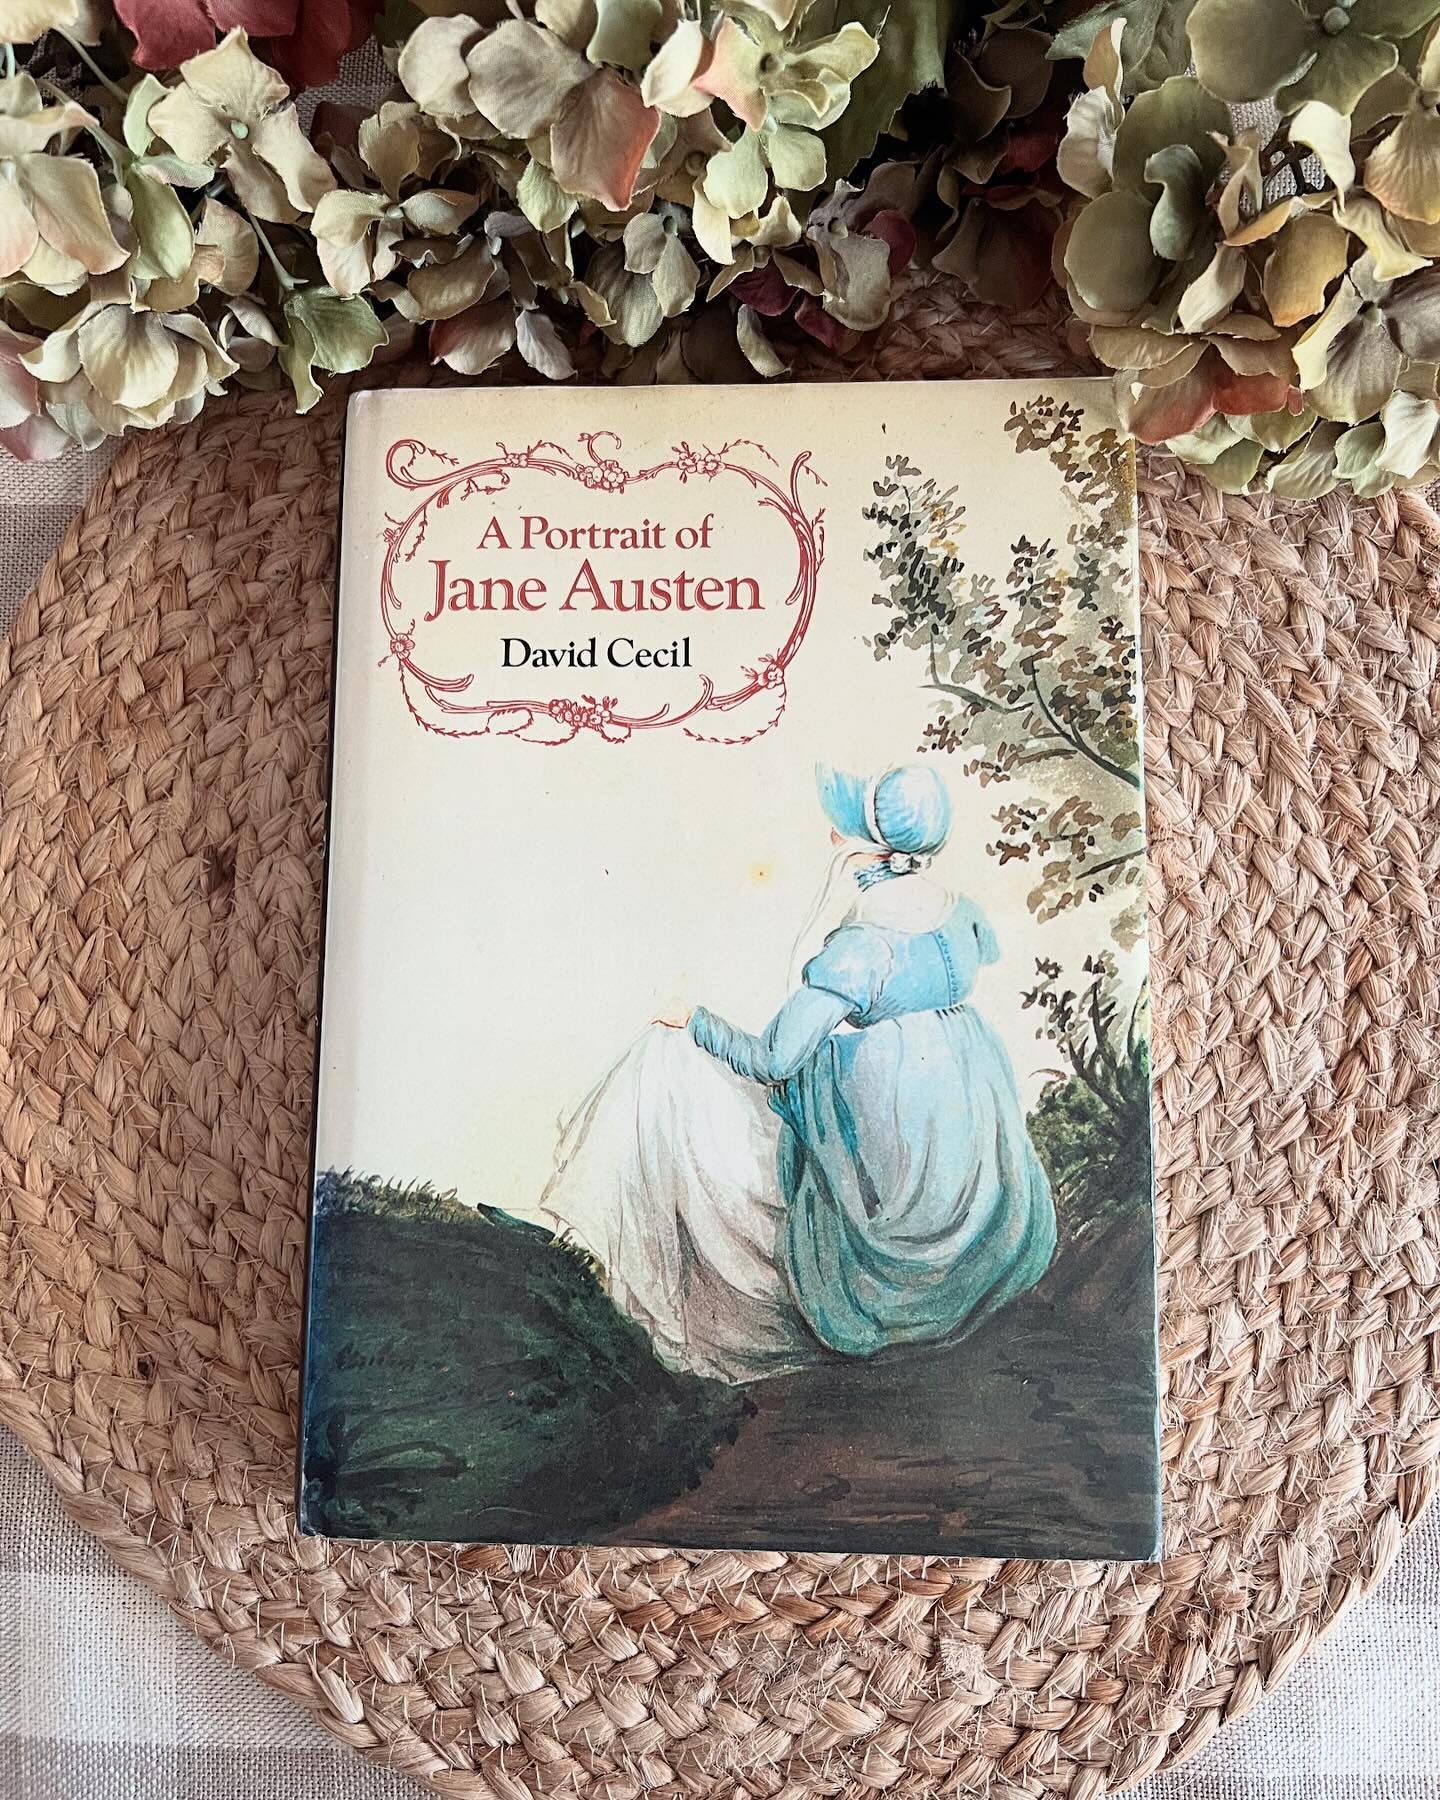 &ldquo;A Portrait of Jane Austen&rdquo; by David Cecil, 1978

Excellent work bringing Jane Austen to life. 

Hardcover with dust jacket. Excellent condition. 
&bull;
&bull;
$9 + shipping 
&bull;
&bull;
Please comment me, mine, 🙋🏻&zwj;♀️, or sold to